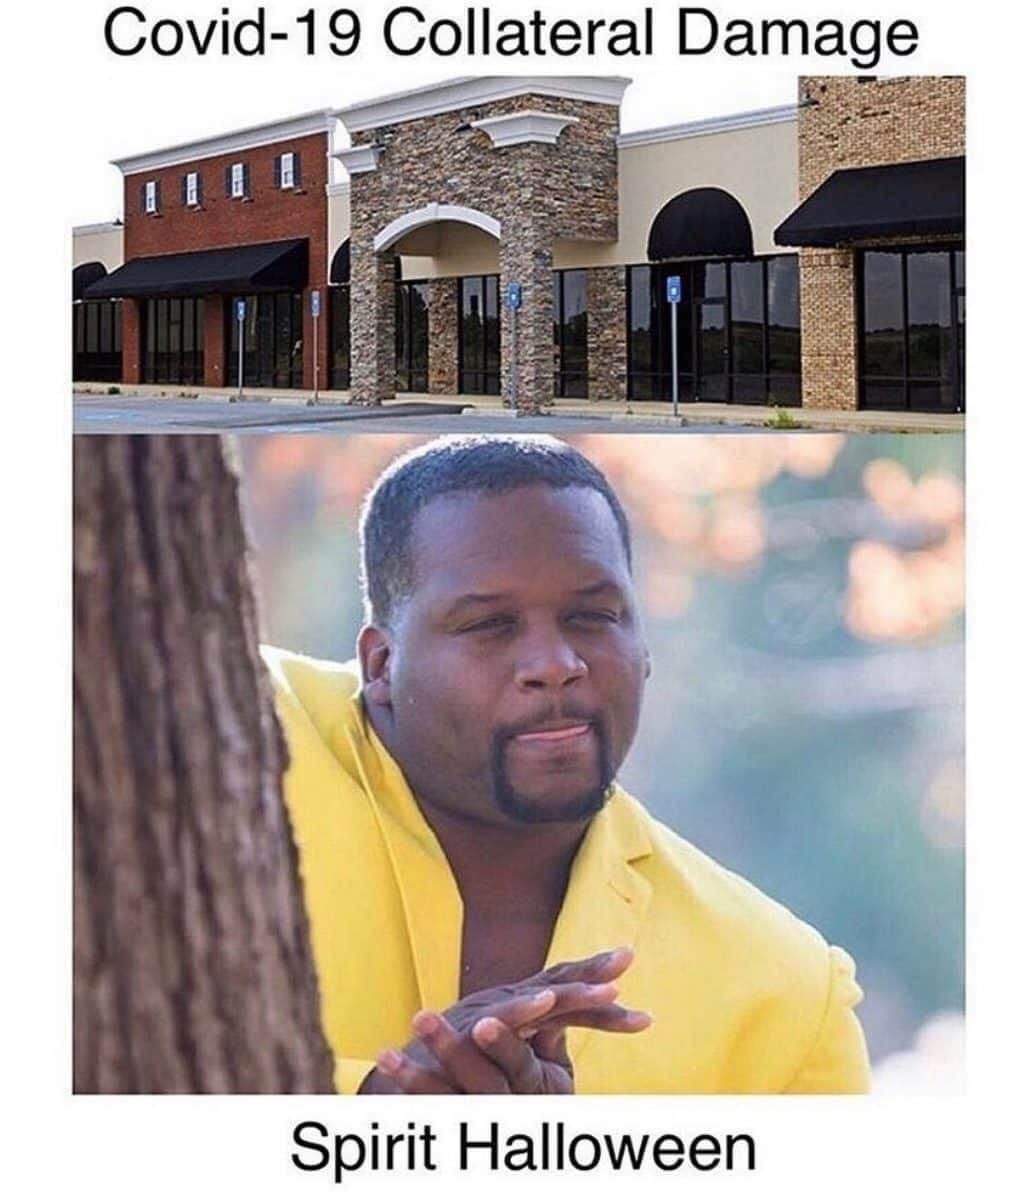 It’s free real estate.